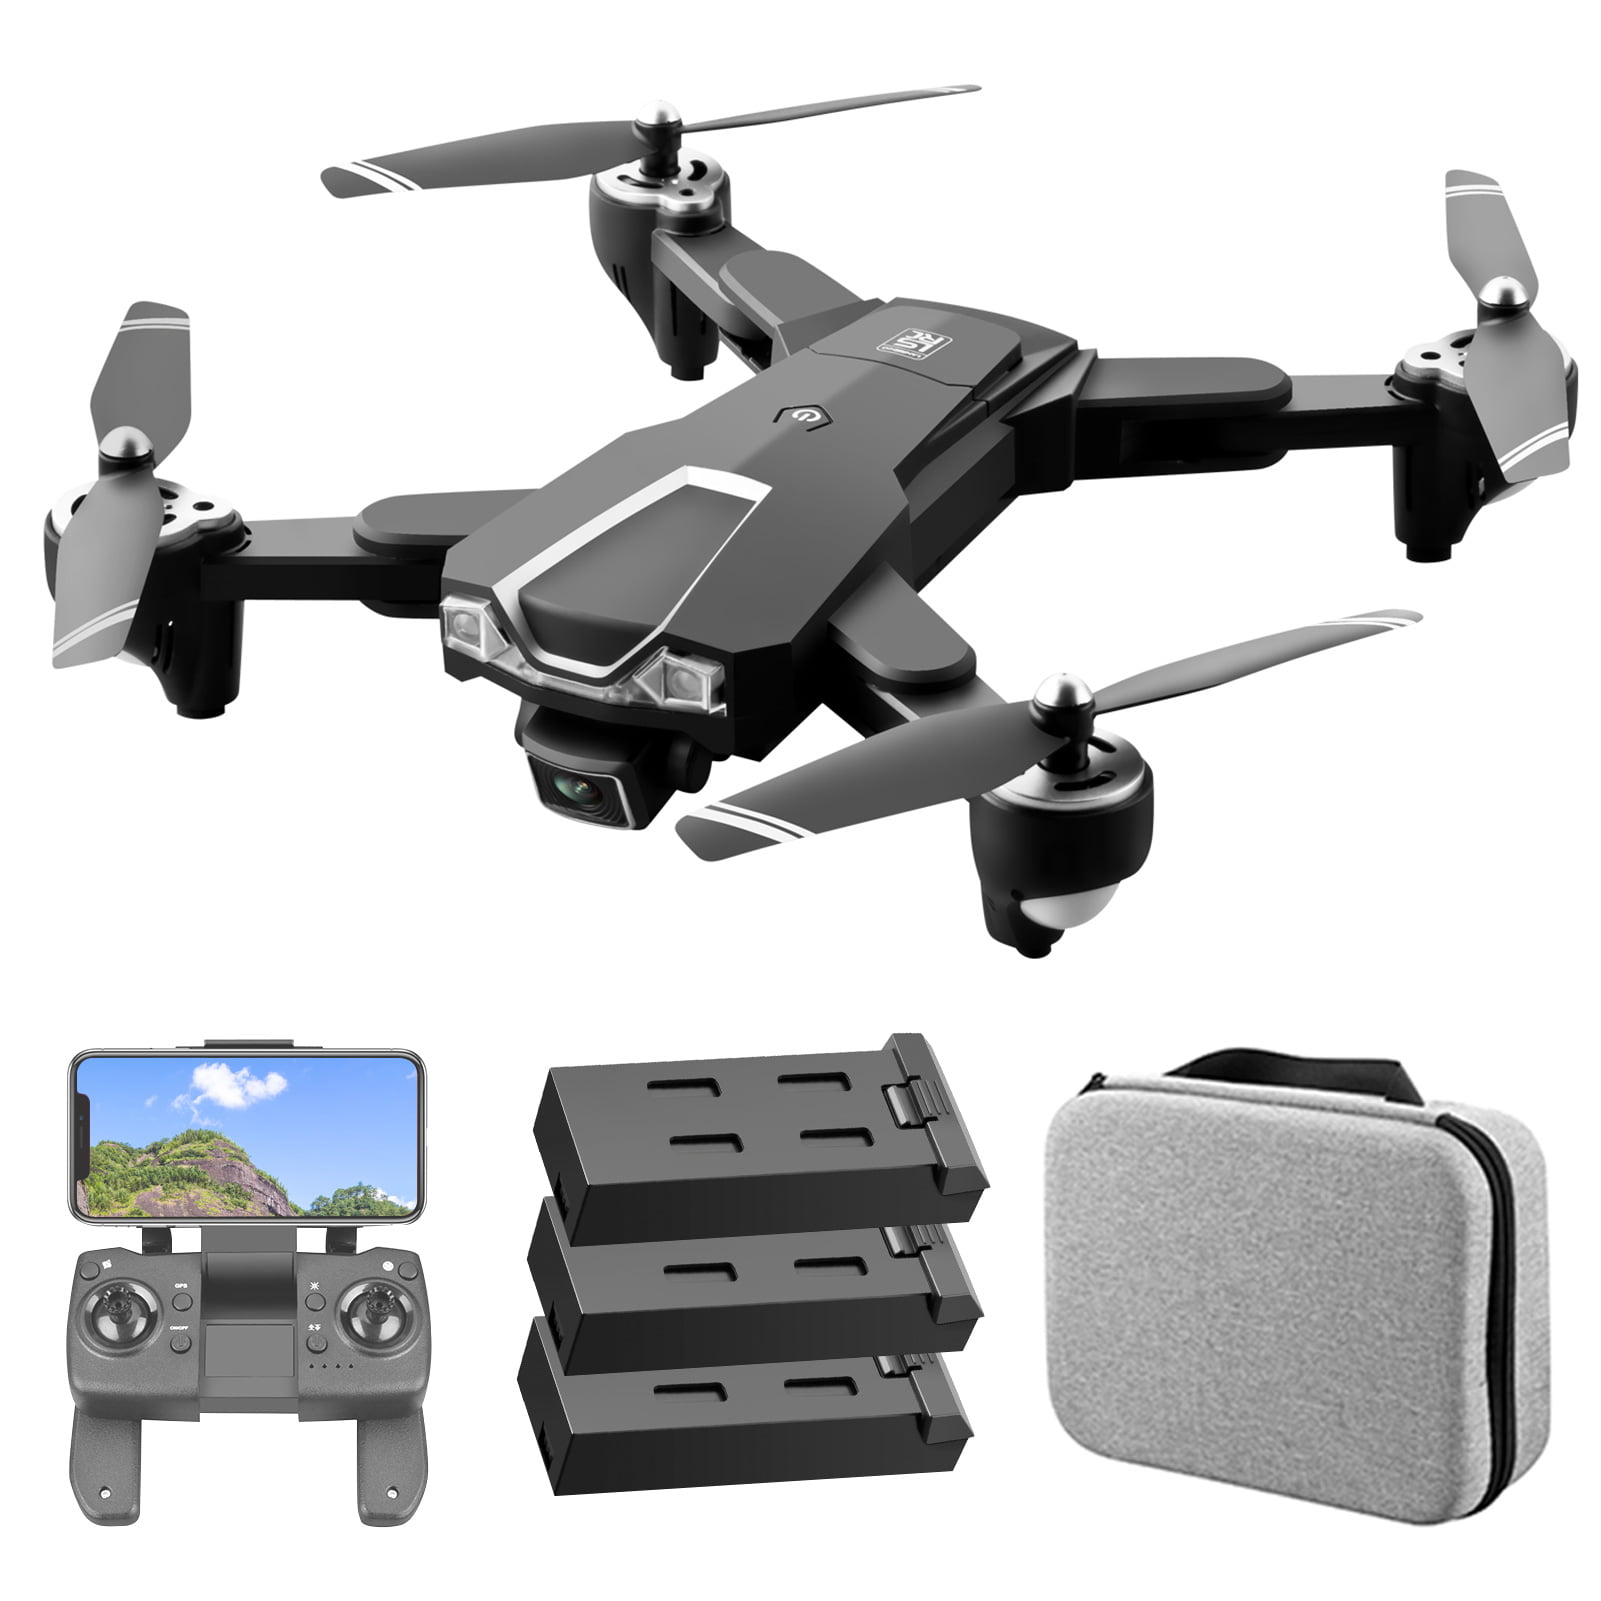 Bag Toy Gift Details about   LF606 2.4G RC Drone with 4K HD Camera WIFI FPV Foldable Quadcopter 